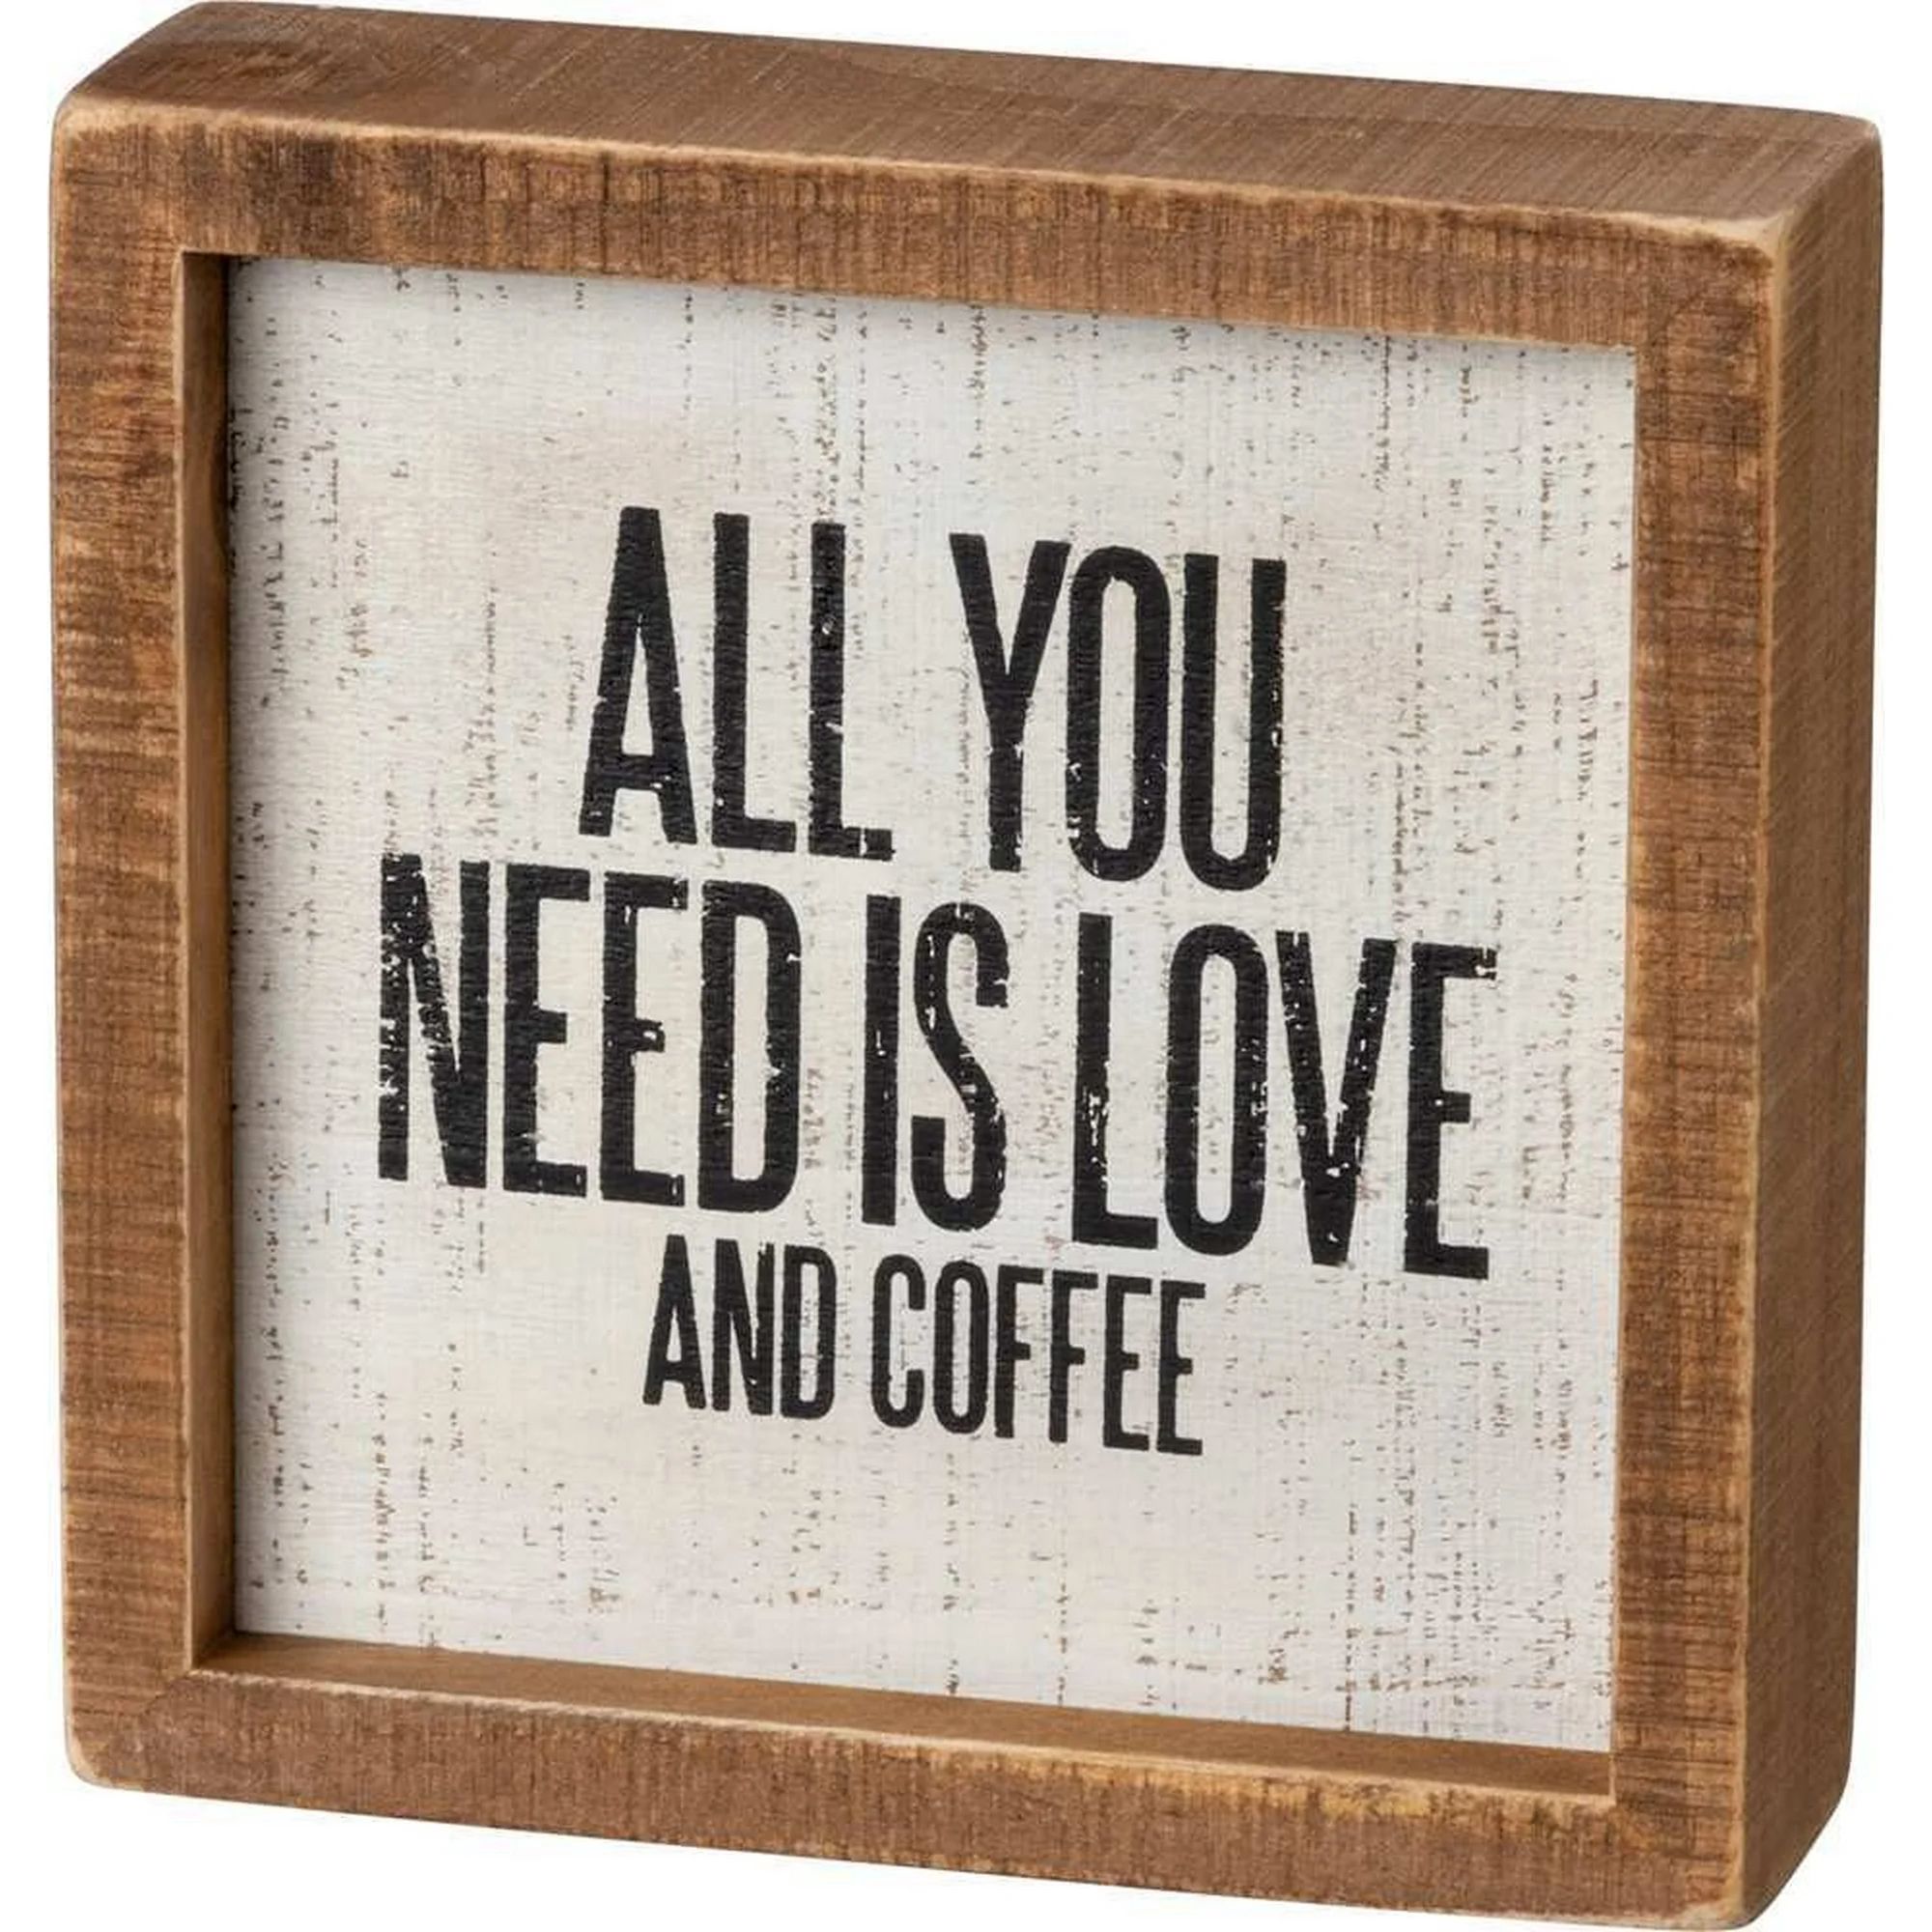 All You Need Is Love And Coffee Inset Box Sign | Walmart (US)